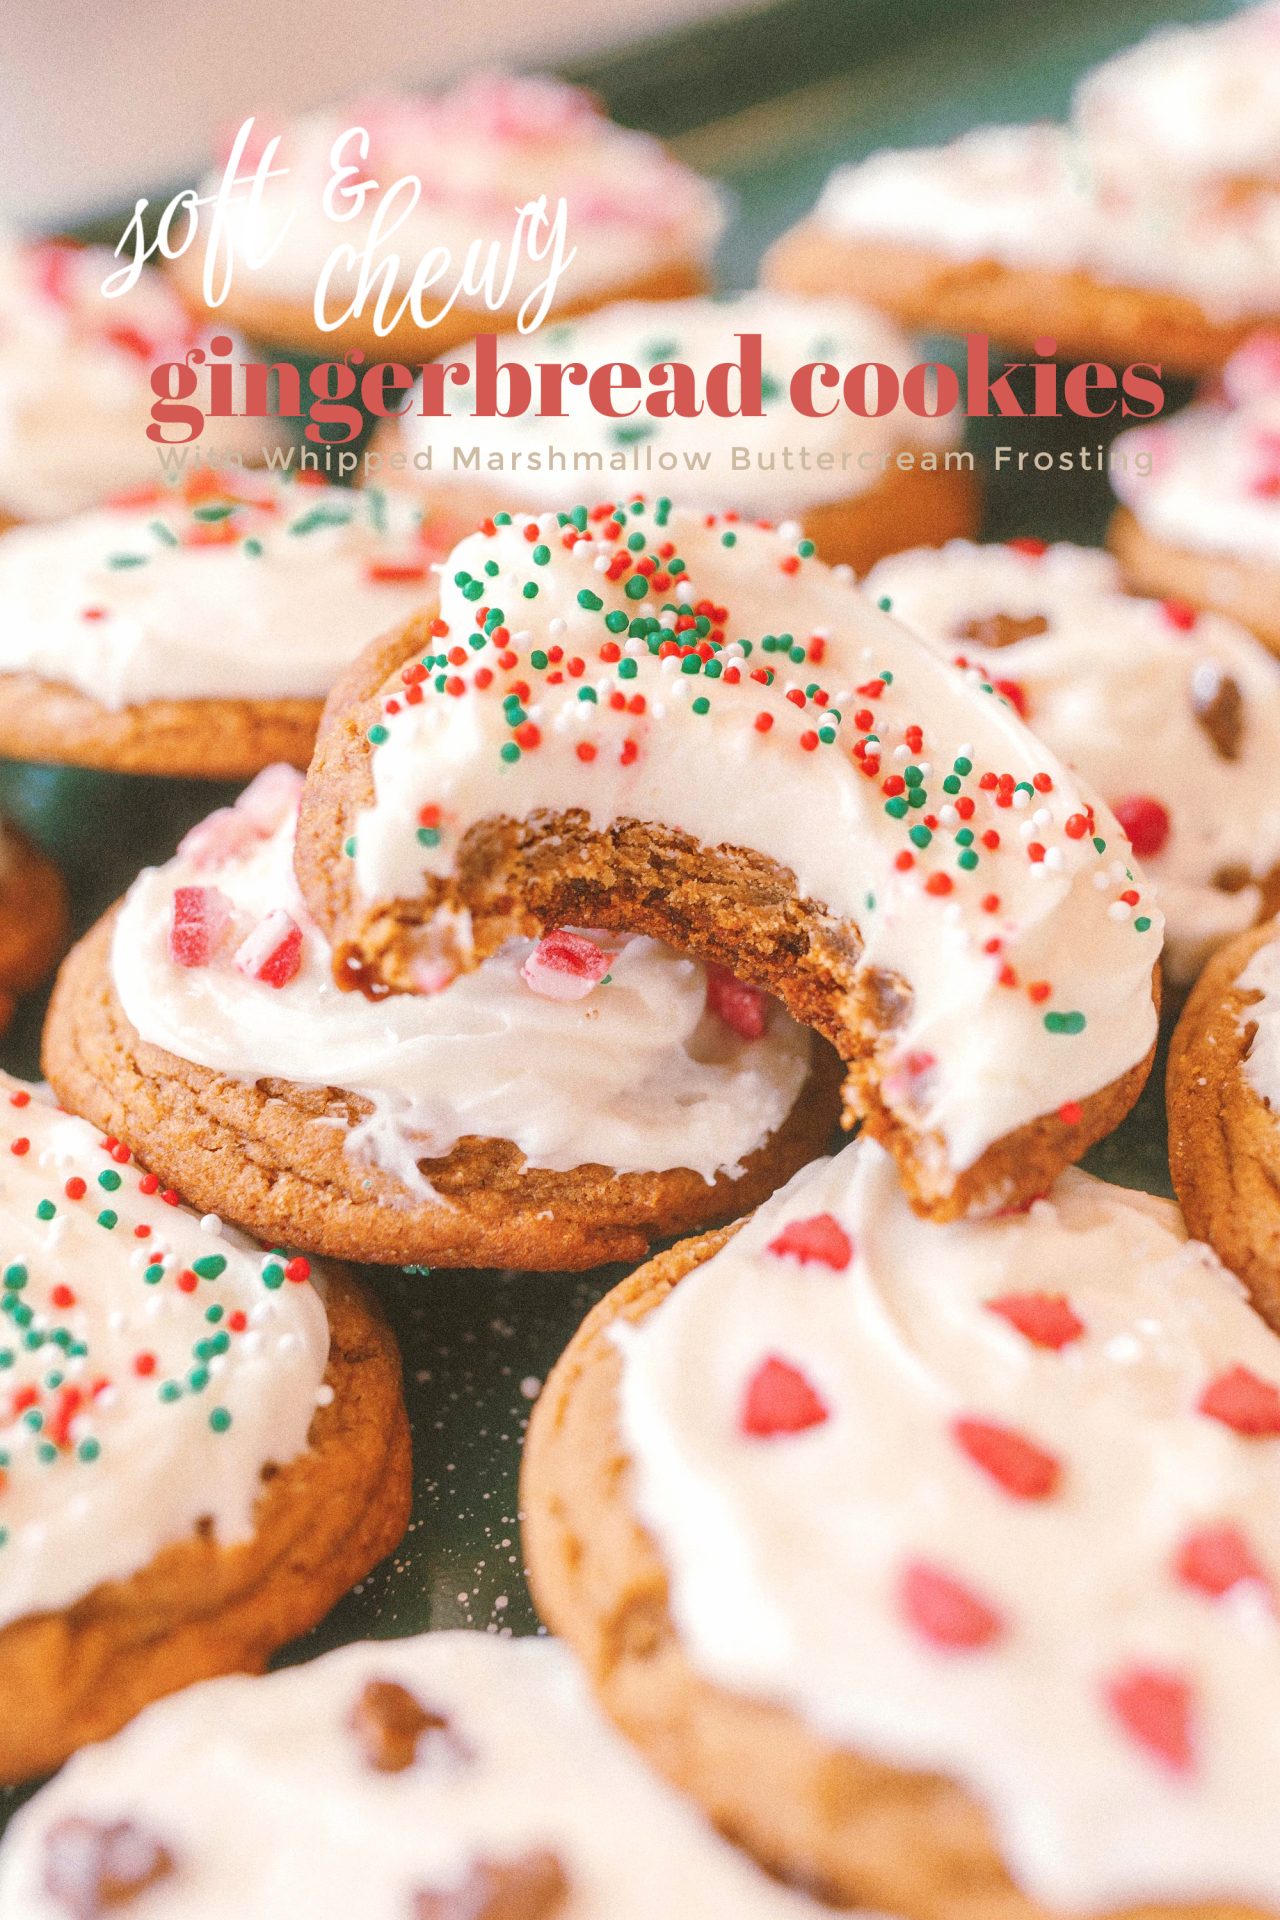 frosted gingerbread cookies, sprinkles, gingerbread cookie, chewy gingerbread, gingerbread, christmas baking, cookies, cookie recipe, festive, christmas cookies, 25 days of christmas, baking with kids, ginger cookies, molasses, pretty baking, gifts for family, baking gifts